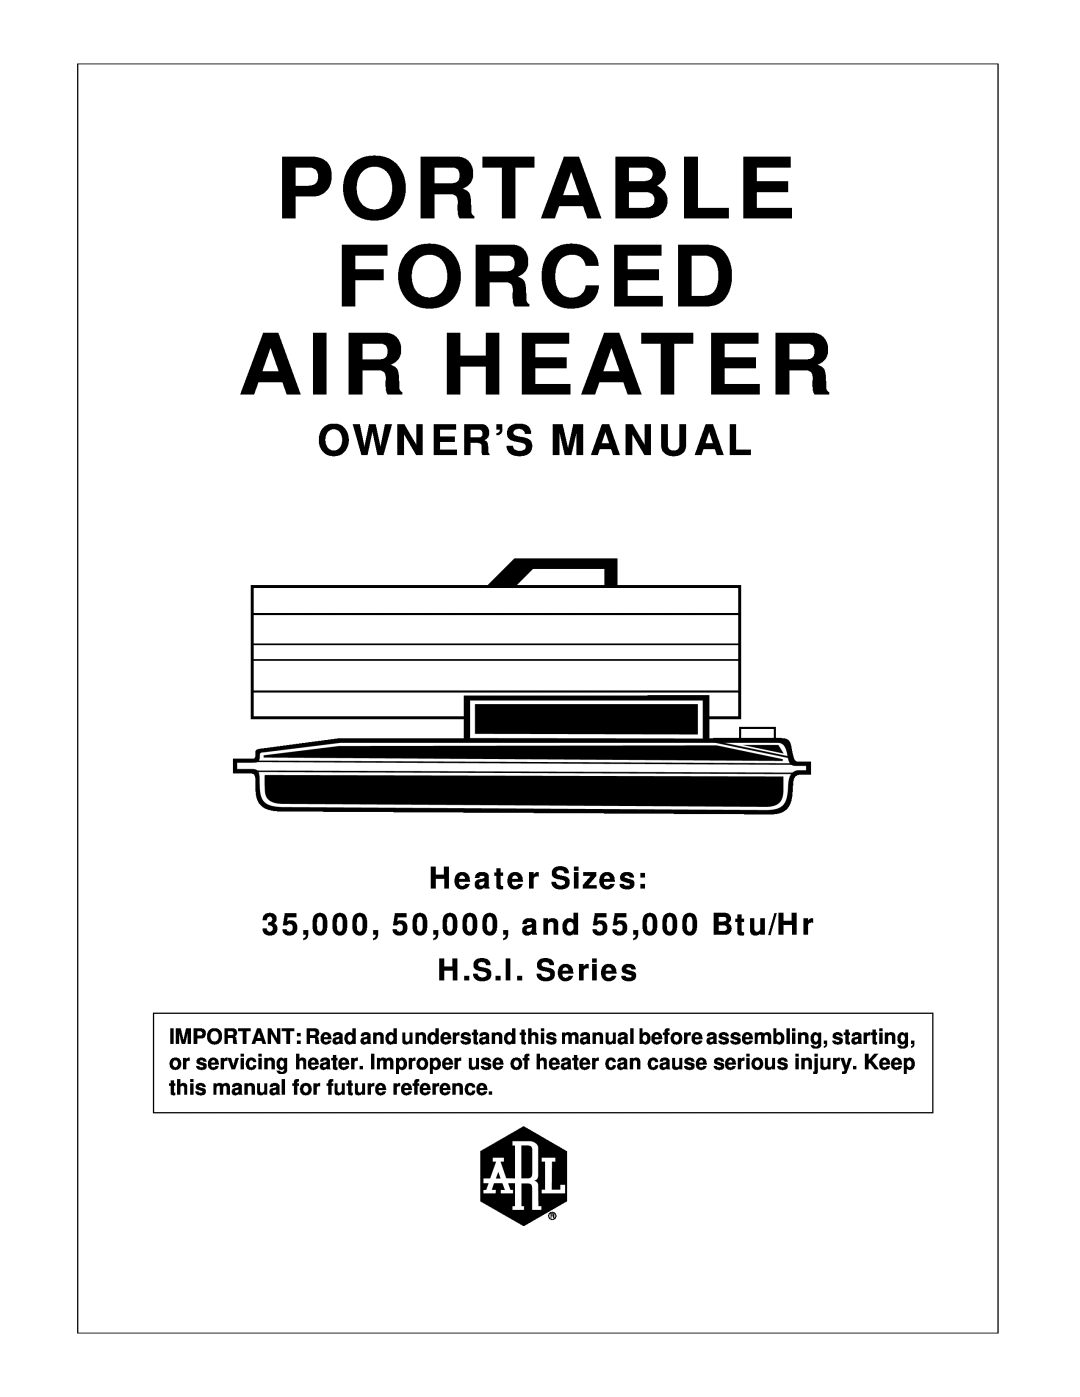 Desa owner manual Portable Forced Air Heater, Heater Sizes 35,000, 50,000, and 55,000 Btu/Hr, H.S.I. Series, Arl Logo 